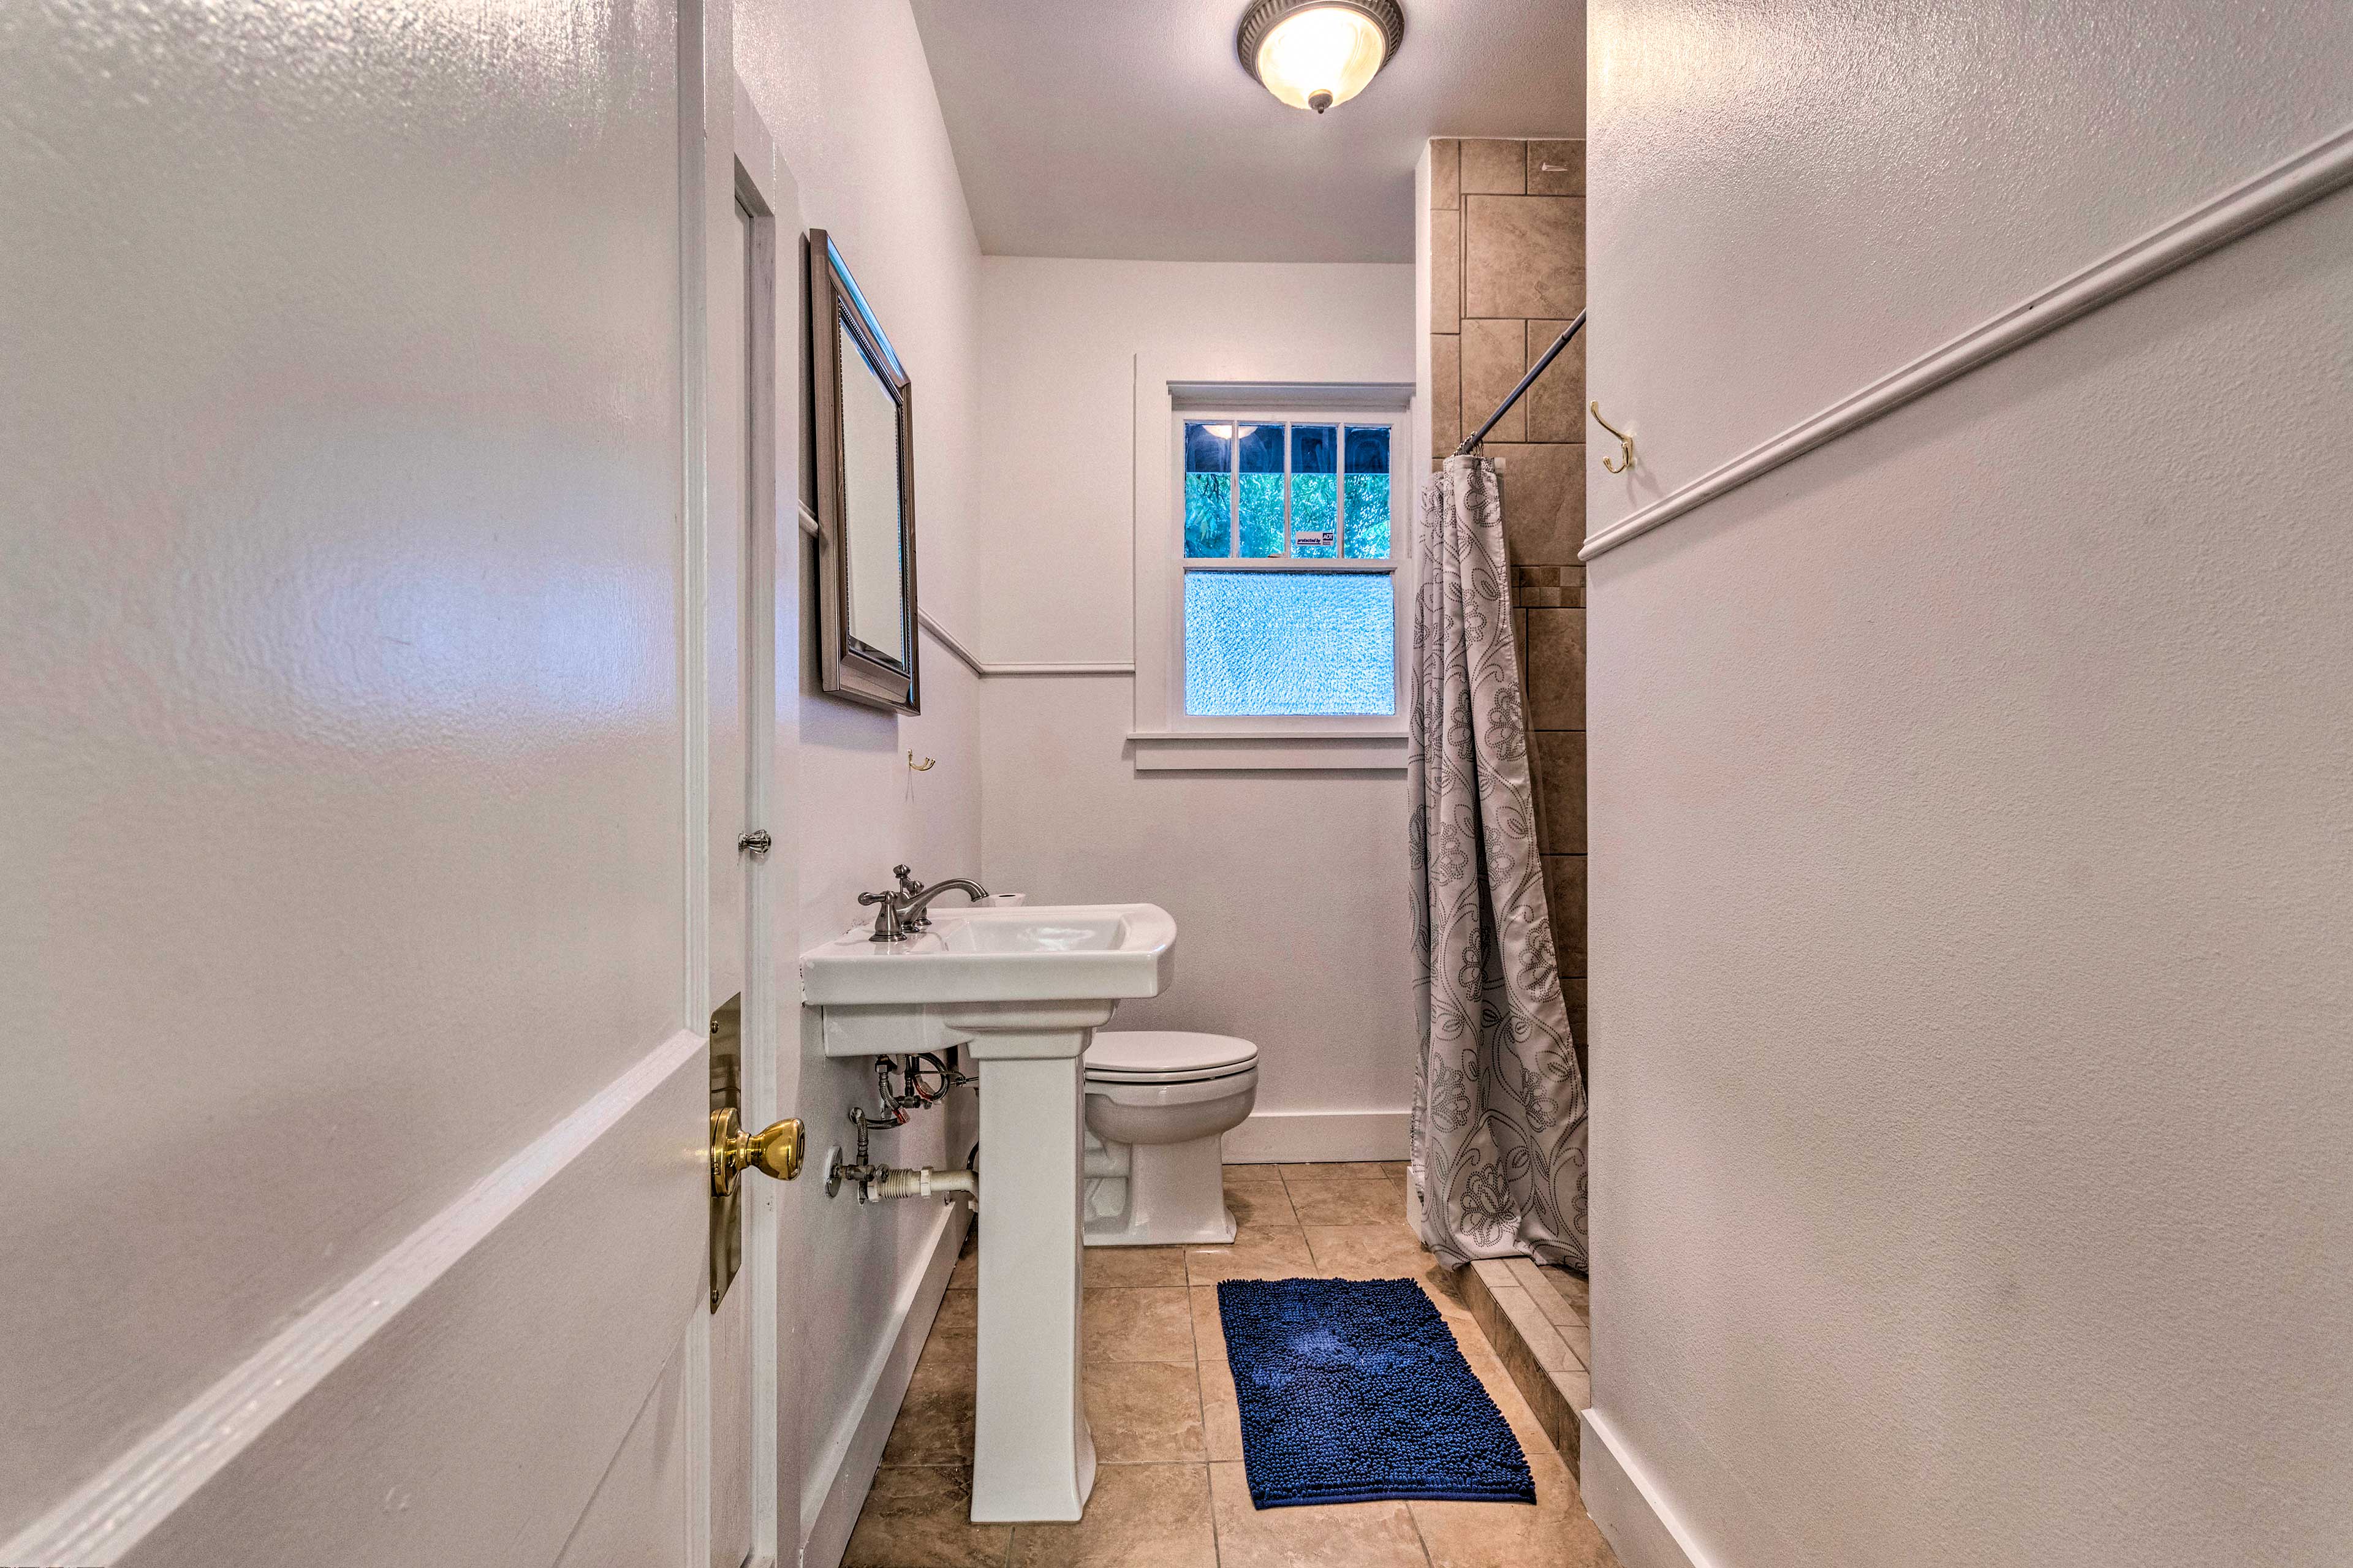 A second full bathroom has a walk-in shower.